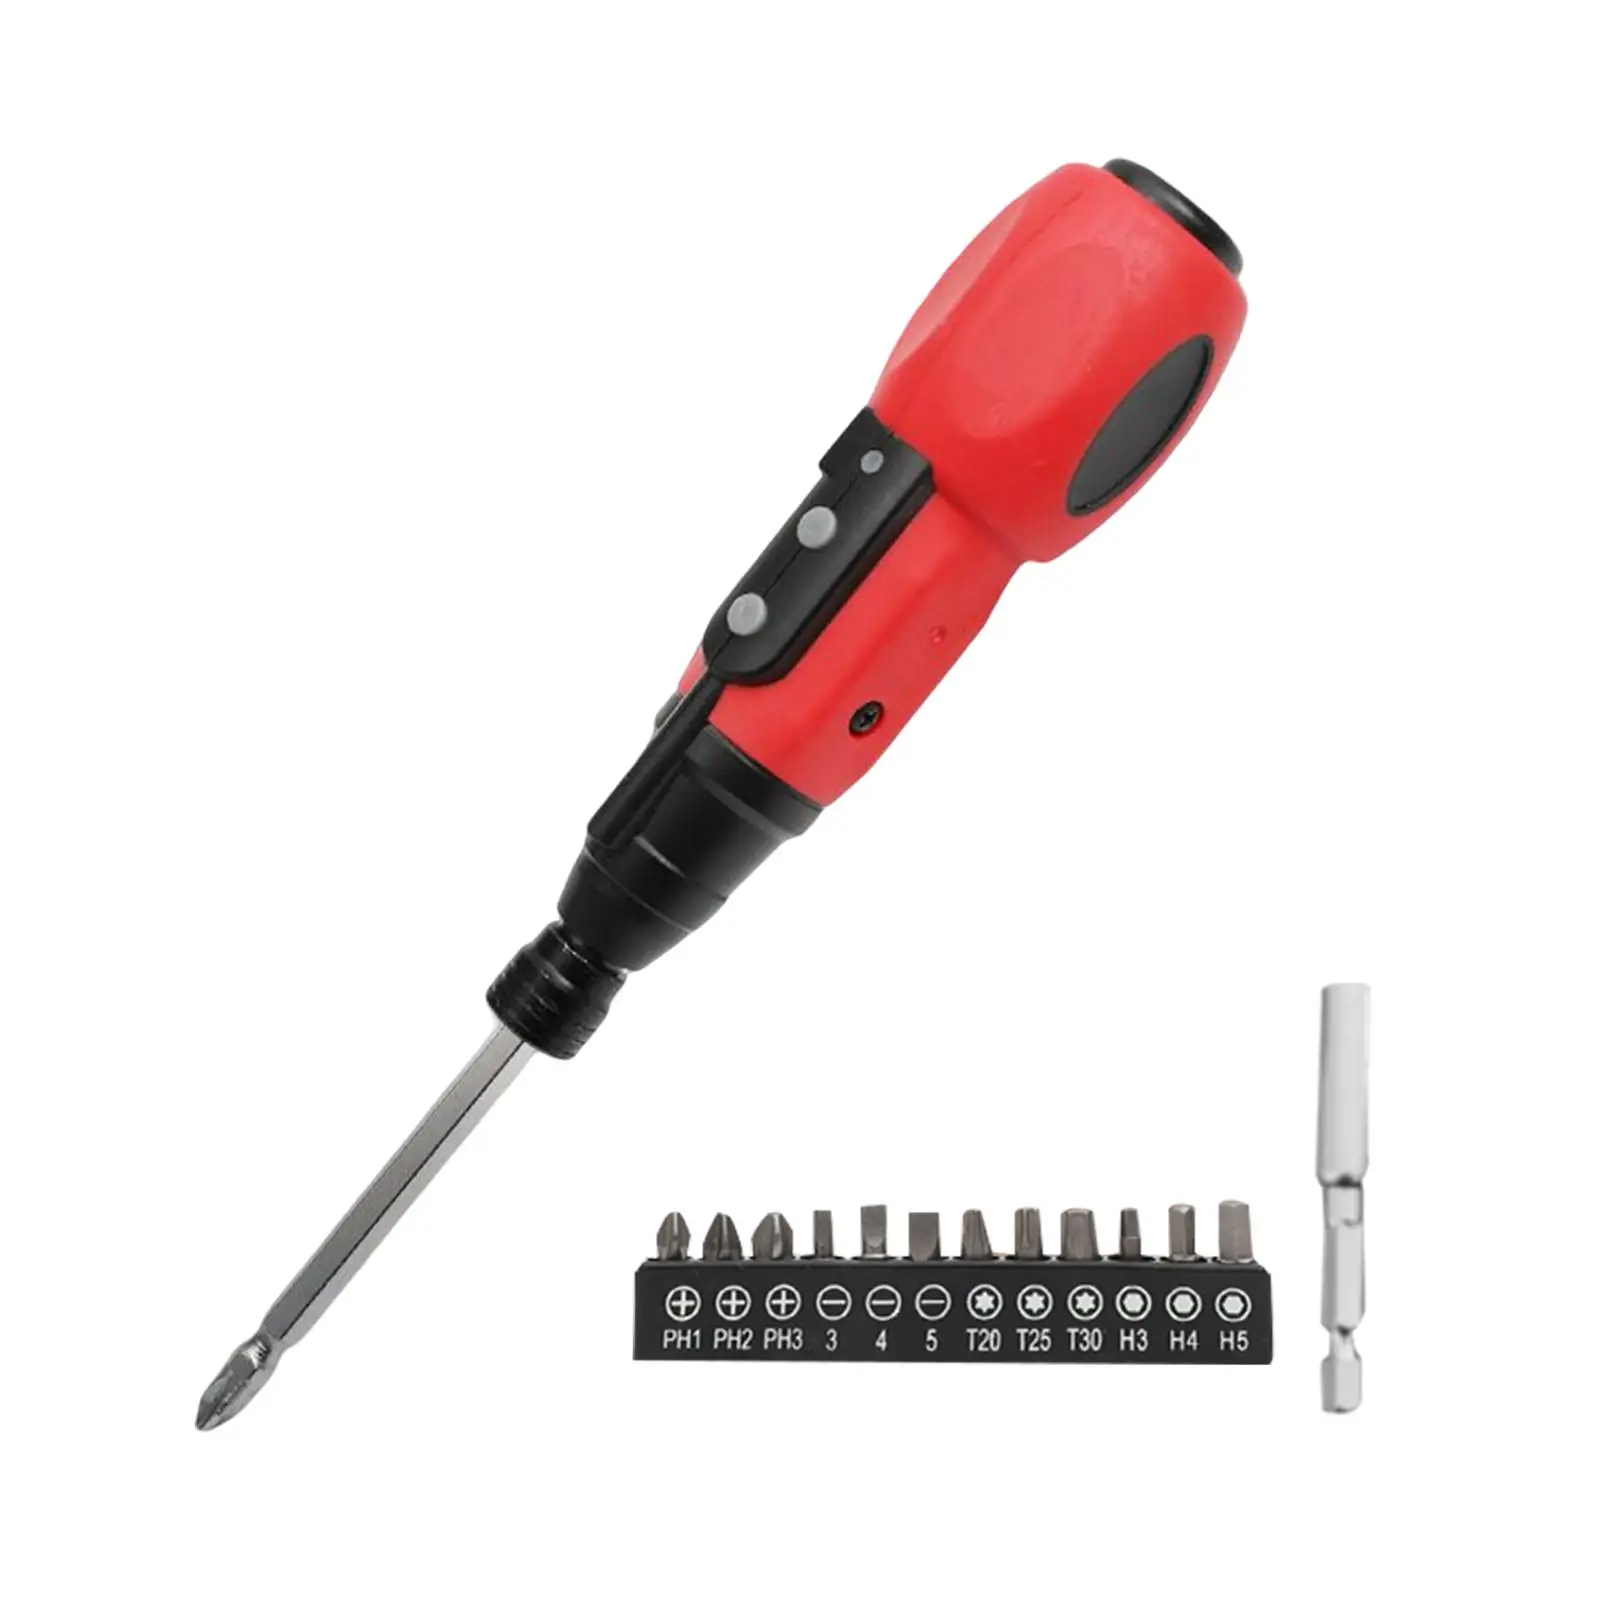 Portable Electric Screwdriver Set Ergonomic Handle Power Screwdriver Cordless Drill with Light for Repairs Cabinet Installation